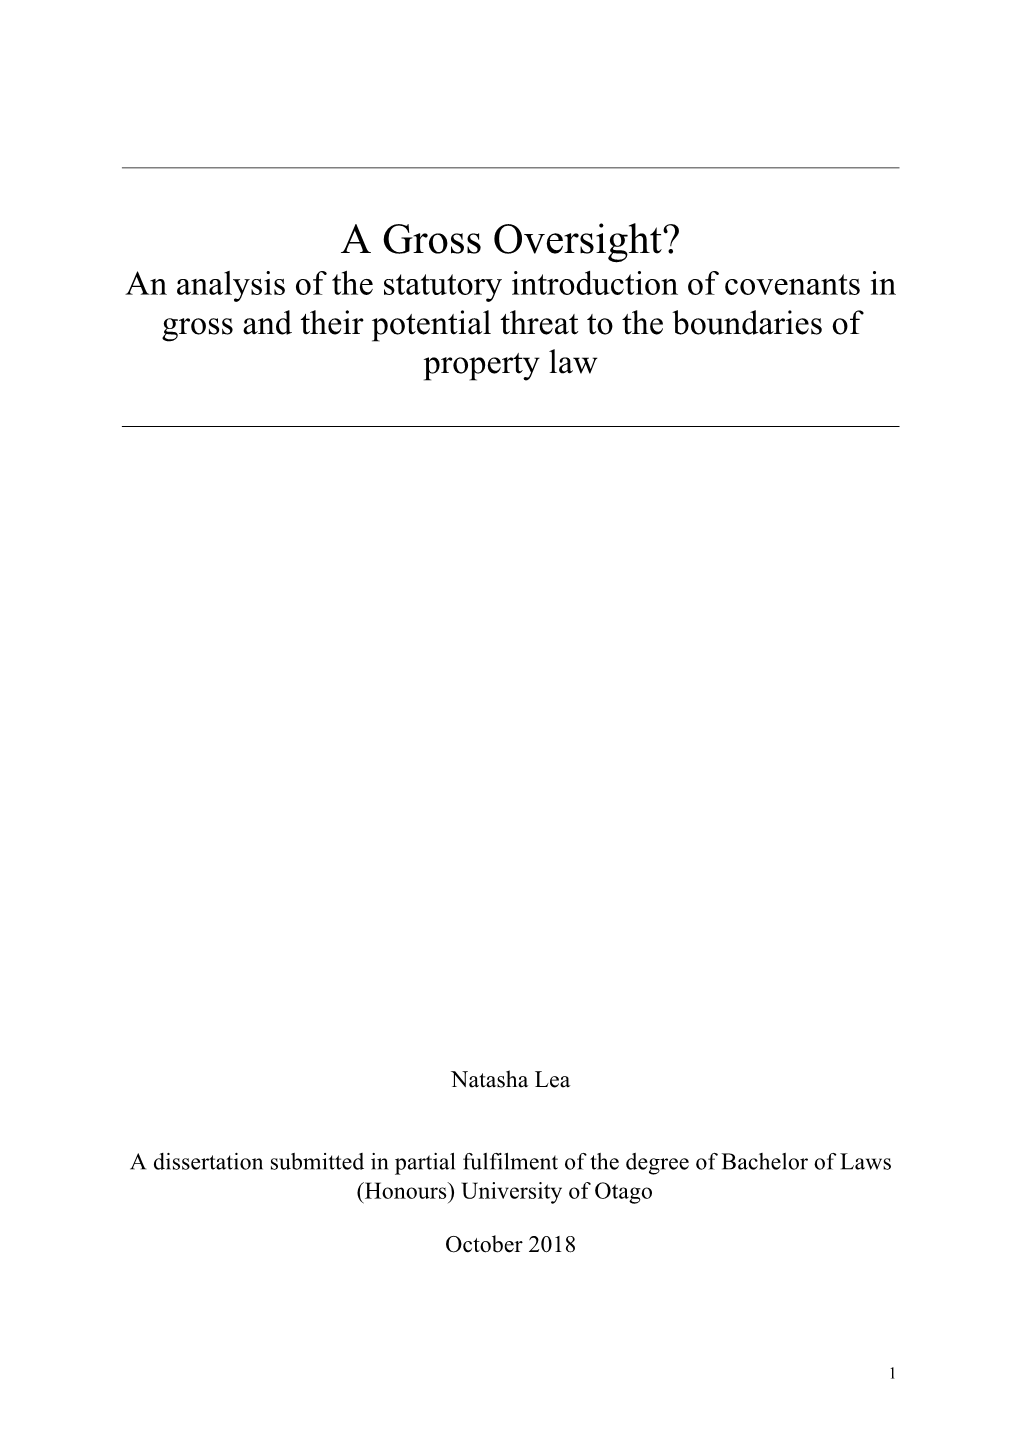 A Gross Oversight? an Analysis of the Statutory Introduction of Covenants in Gross and Their Potential Threat to the Boundaries of Property Law